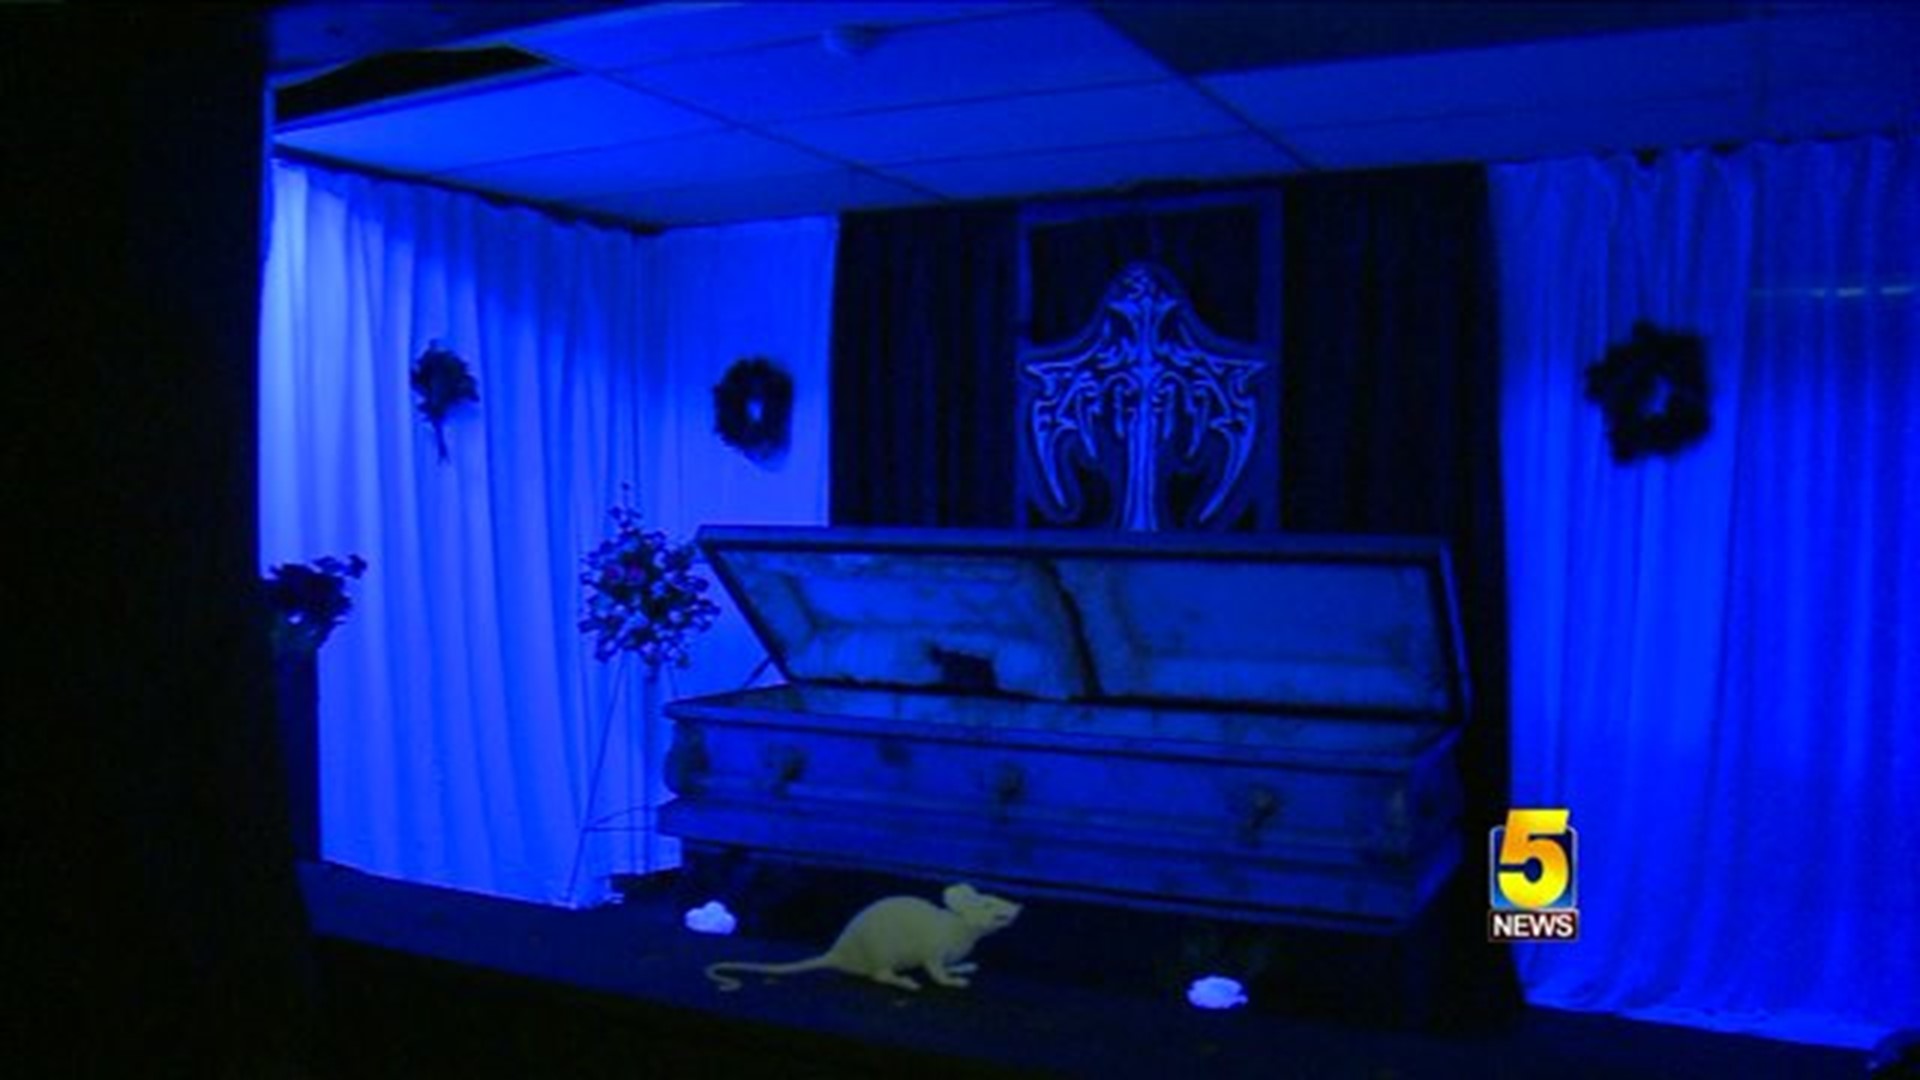 Boys and Girls Club Haunted House Now Open